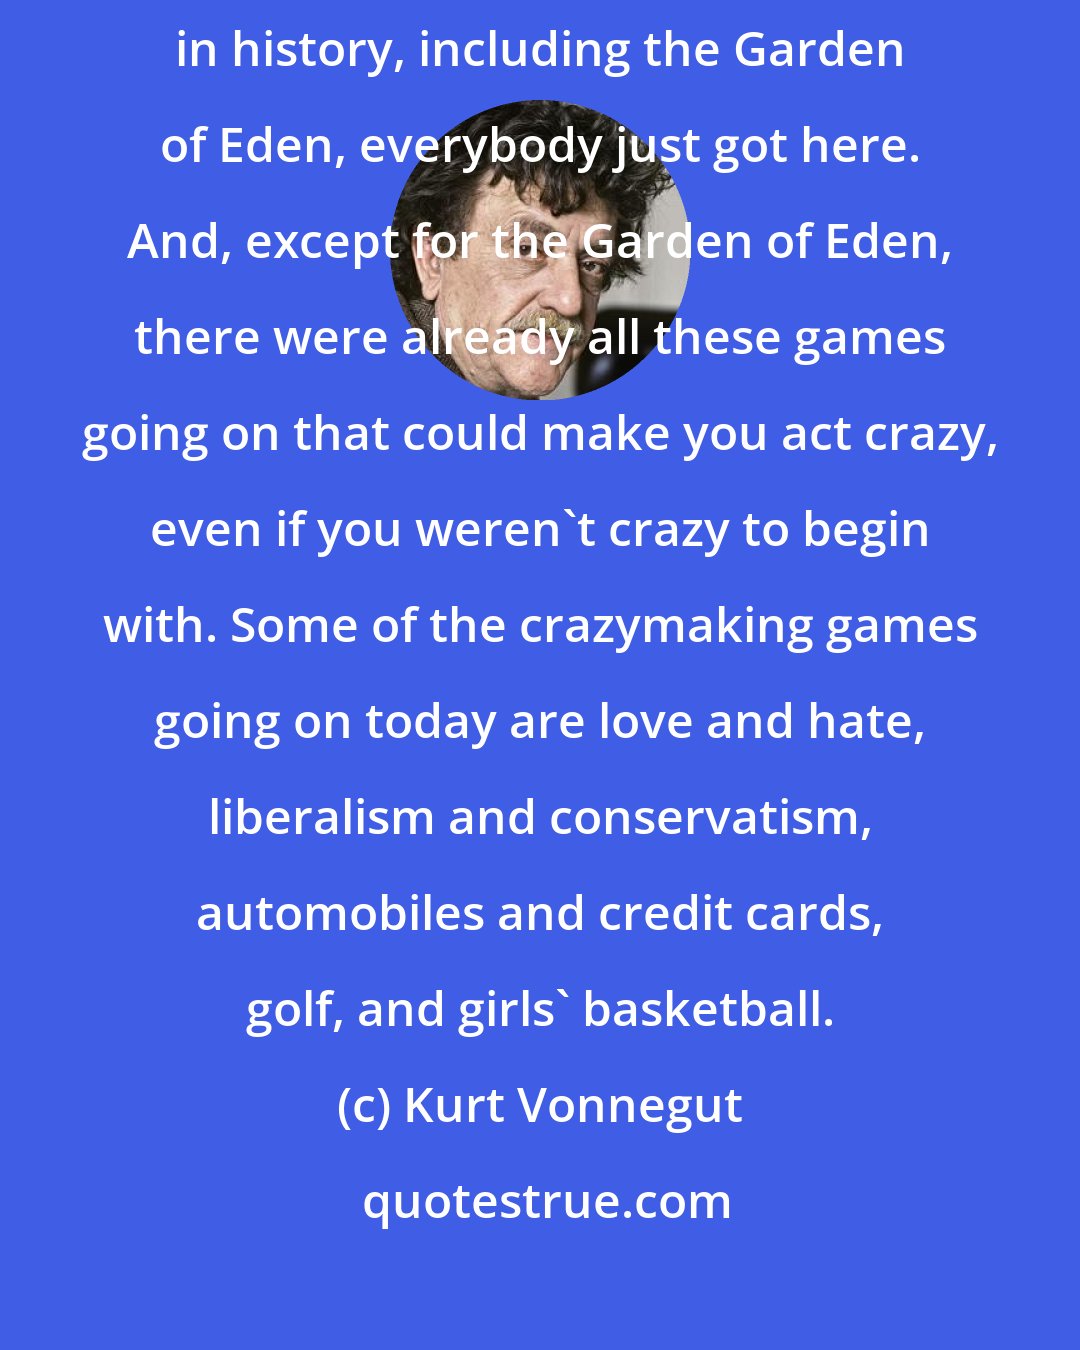 Kurt Vonnegut: But I have to say this in defense of humankind: In no matter what era in history, including the Garden of Eden, everybody just got here. And, except for the Garden of Eden, there were already all these games going on that could make you act crazy, even if you weren't crazy to begin with. Some of the crazymaking games going on today are love and hate, liberalism and conservatism, automobiles and credit cards, golf, and girls' basketball.